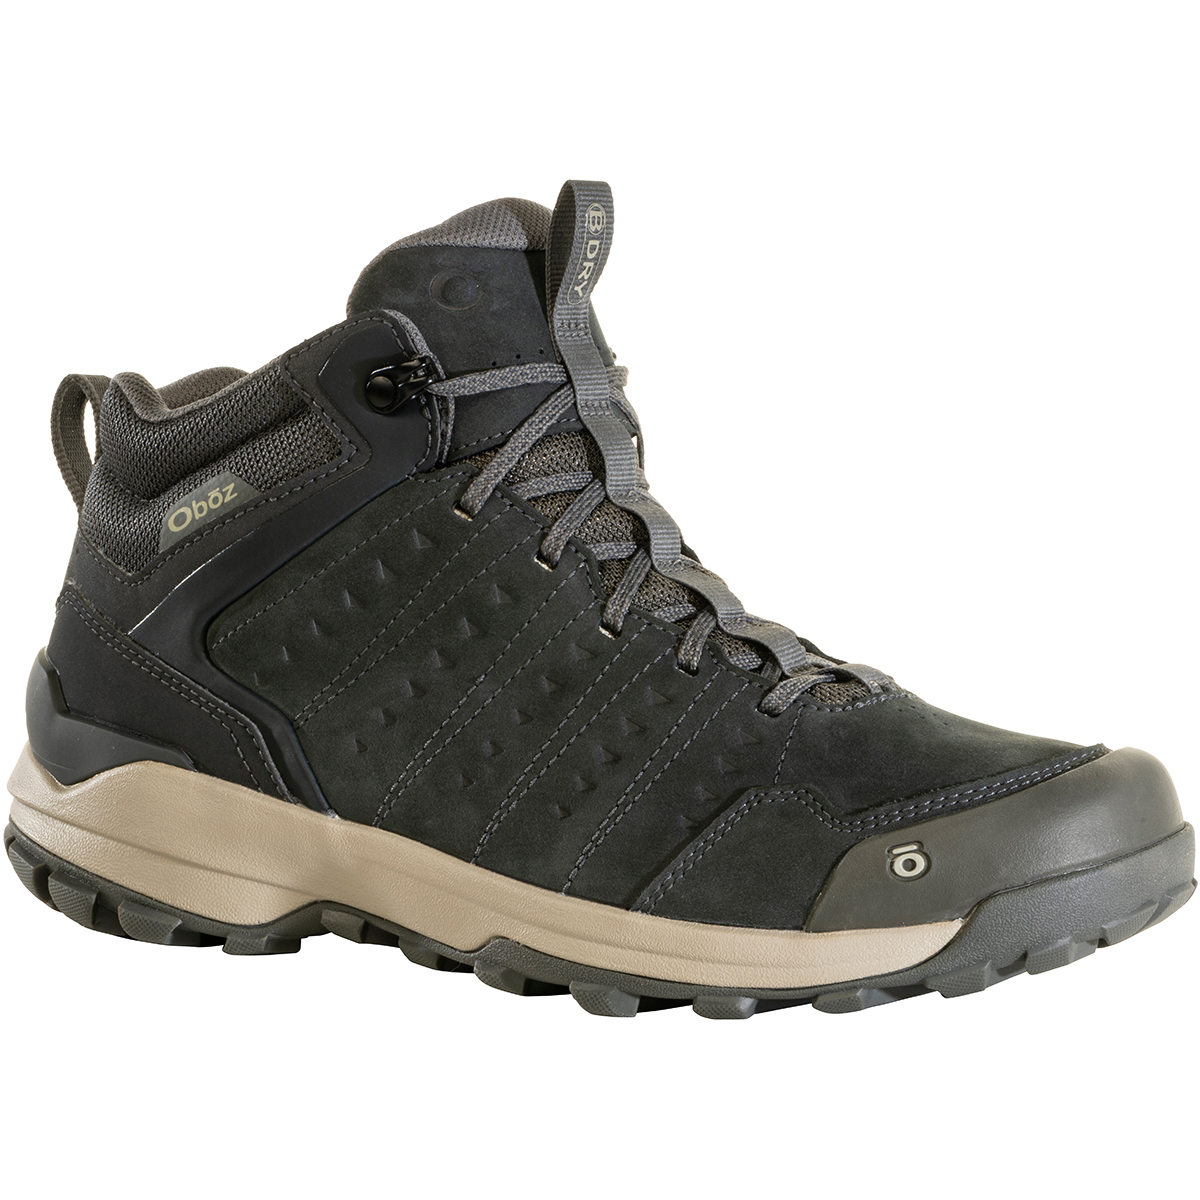 Oboz Men's Sypes Mid Leather B-Dry Hiking Boot